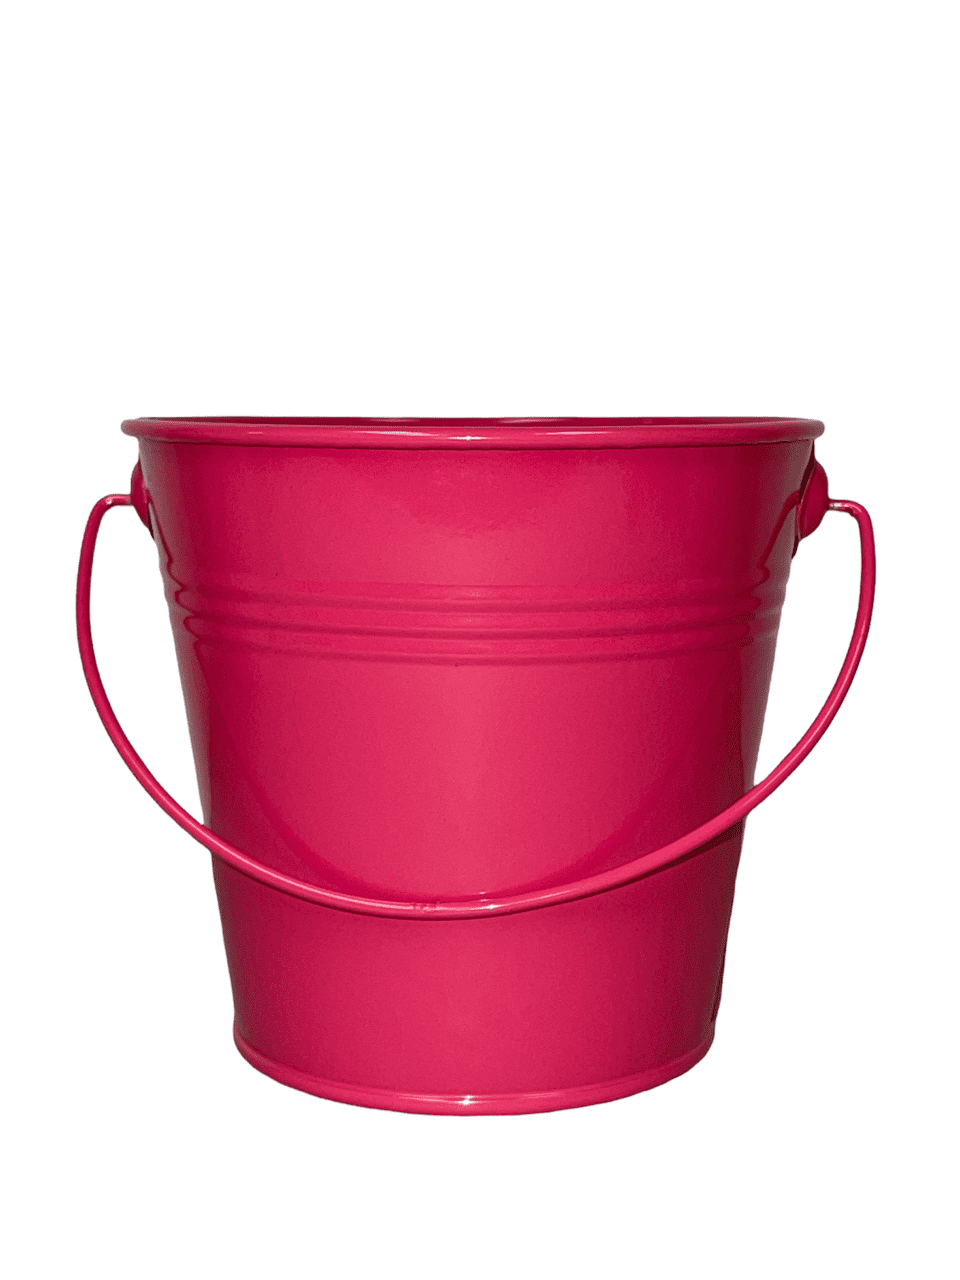 6-Pack Colorful Small Metal Buckets with Handles for The Beach